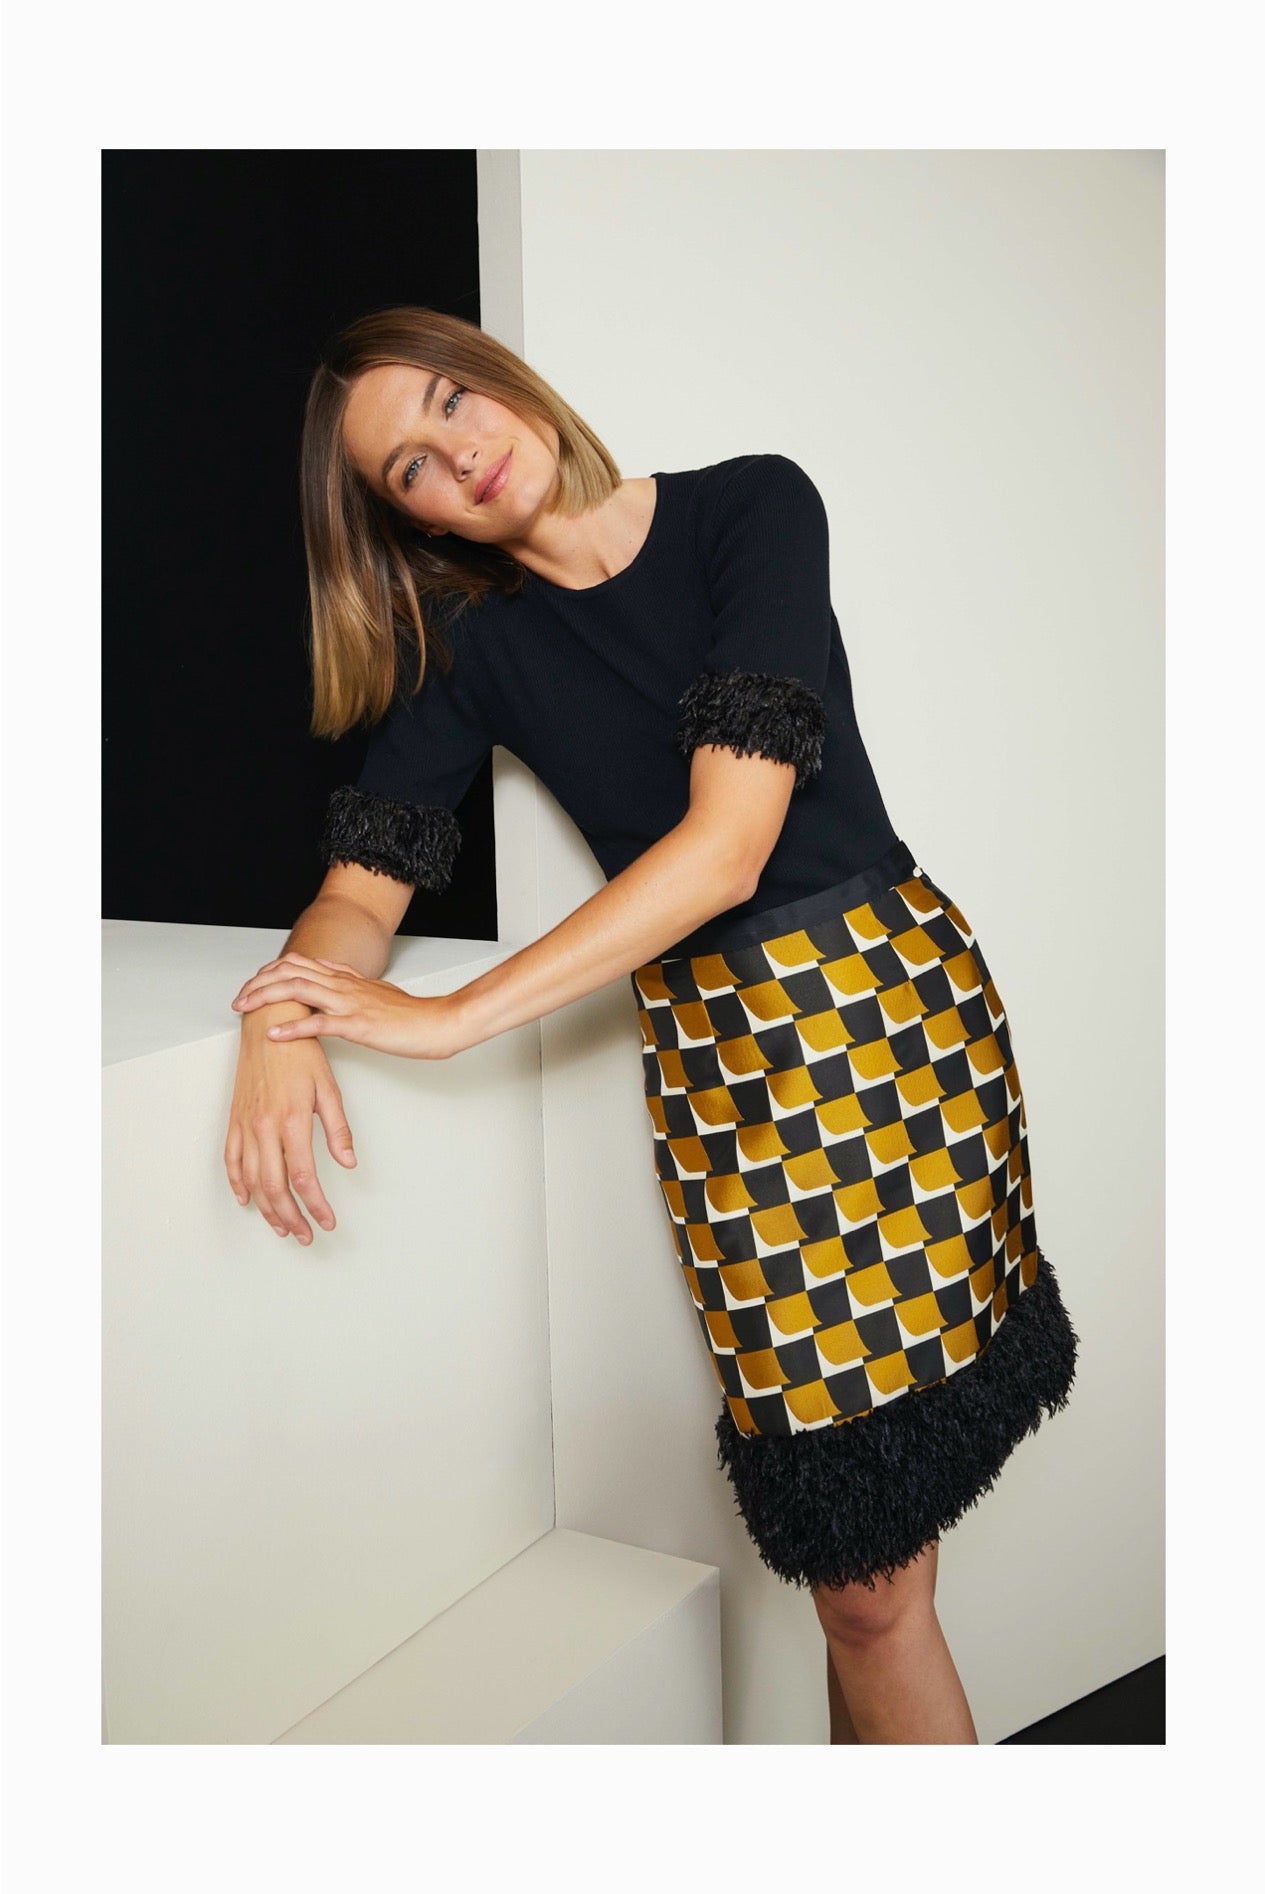 The Quant Skirt